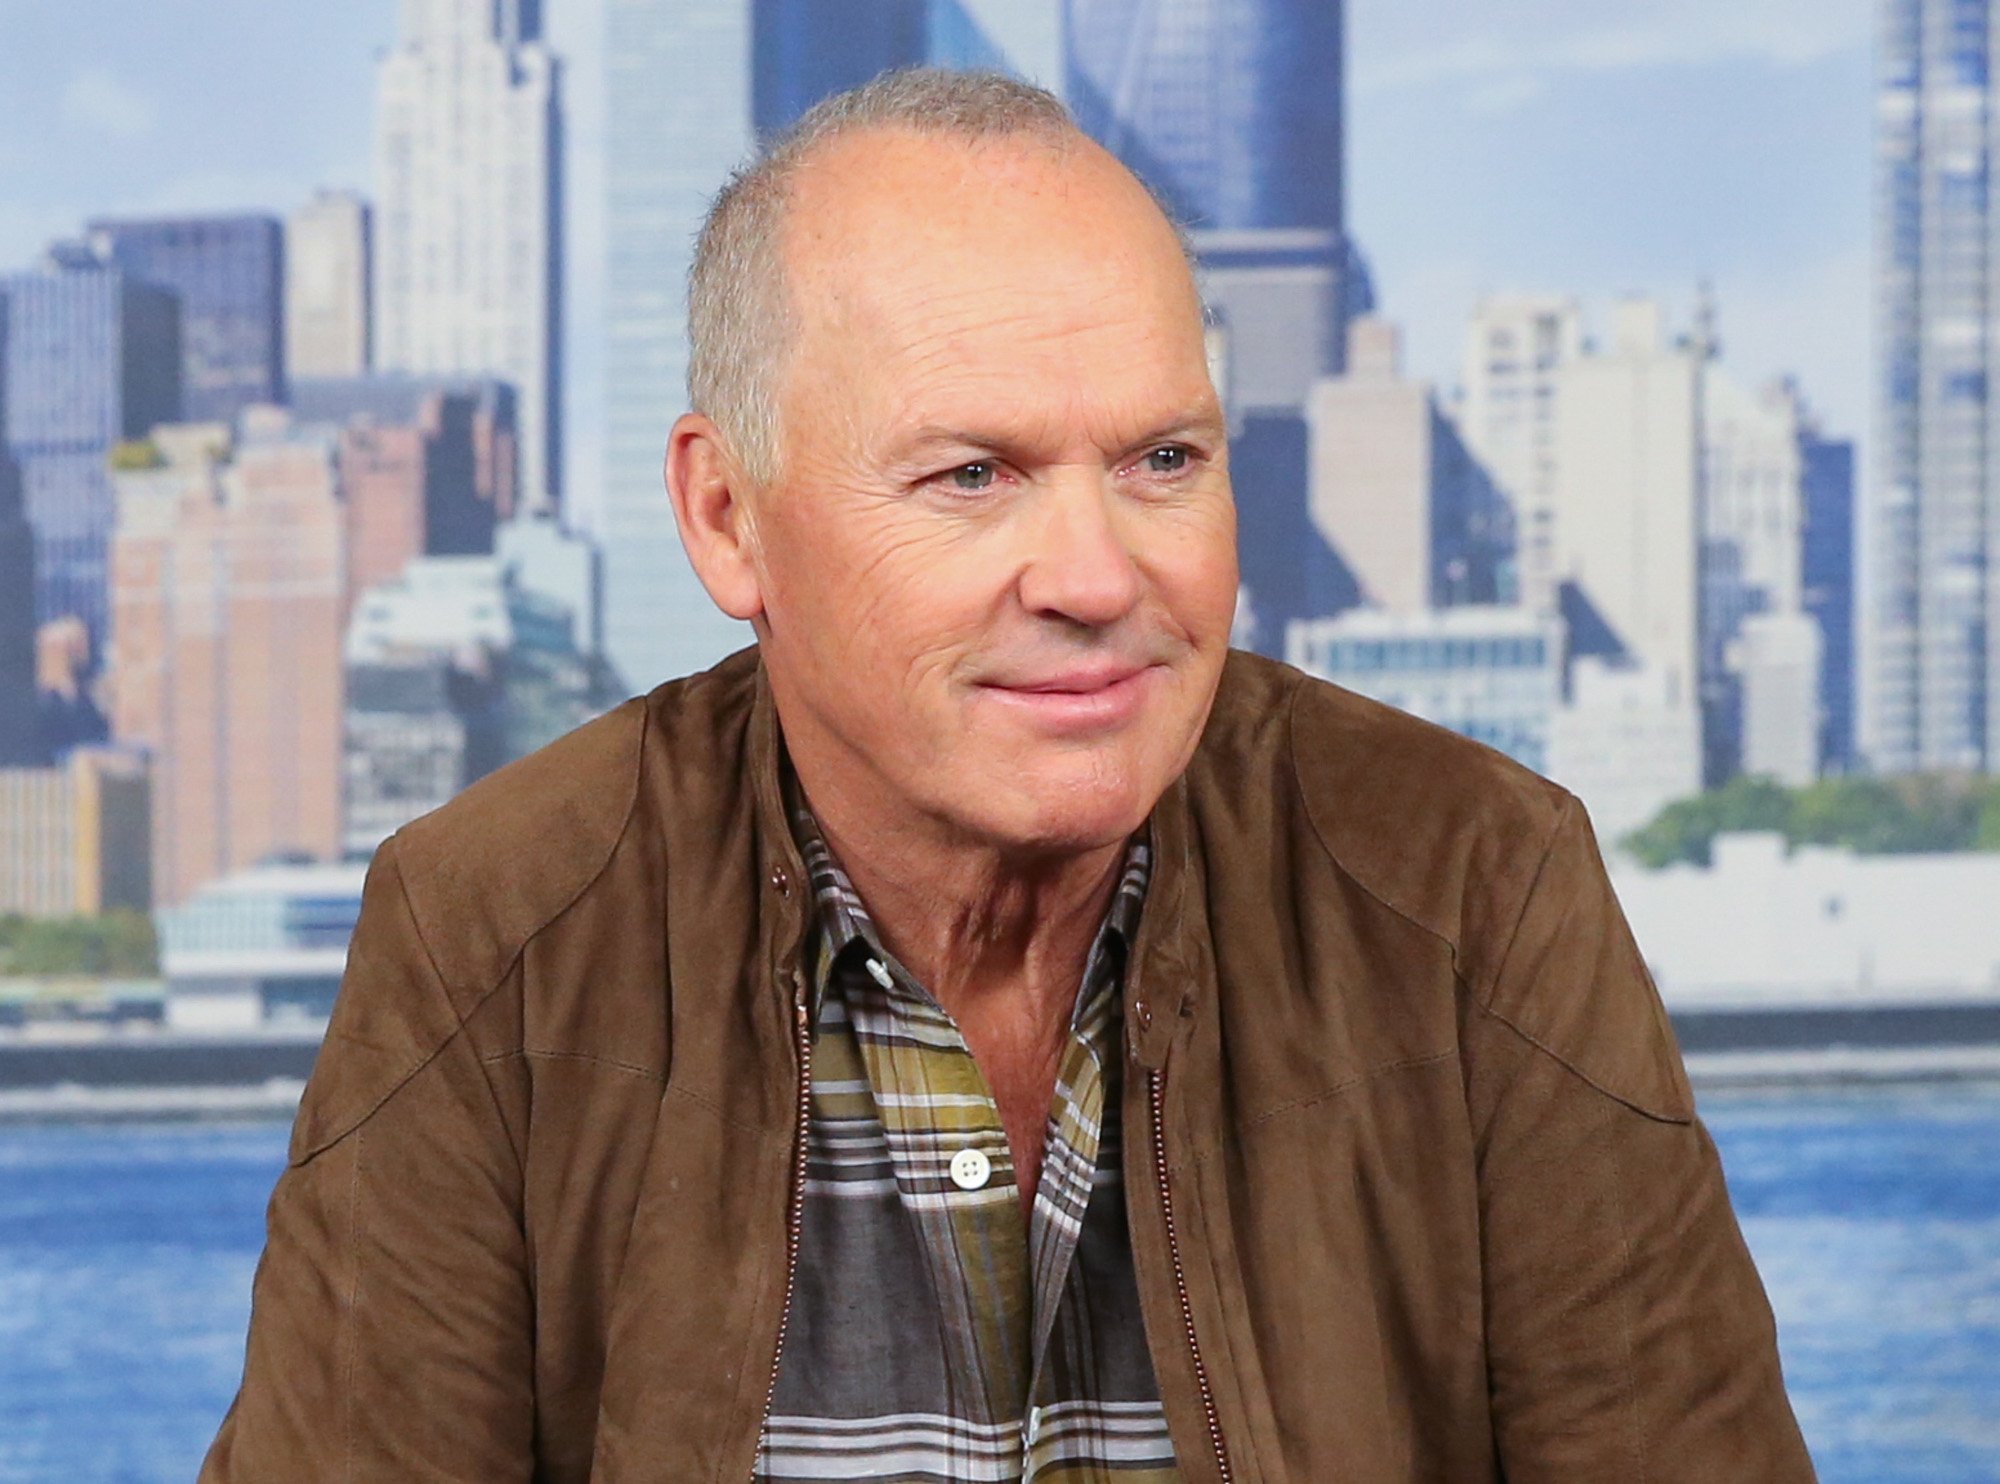 Michael Keaton promoting 'Spider-Man: Homecoming,' where he plays the Spider-Man villain Vulture. He's wearing a plaid shirt and brown jacket, and the image of New York City is behind him.